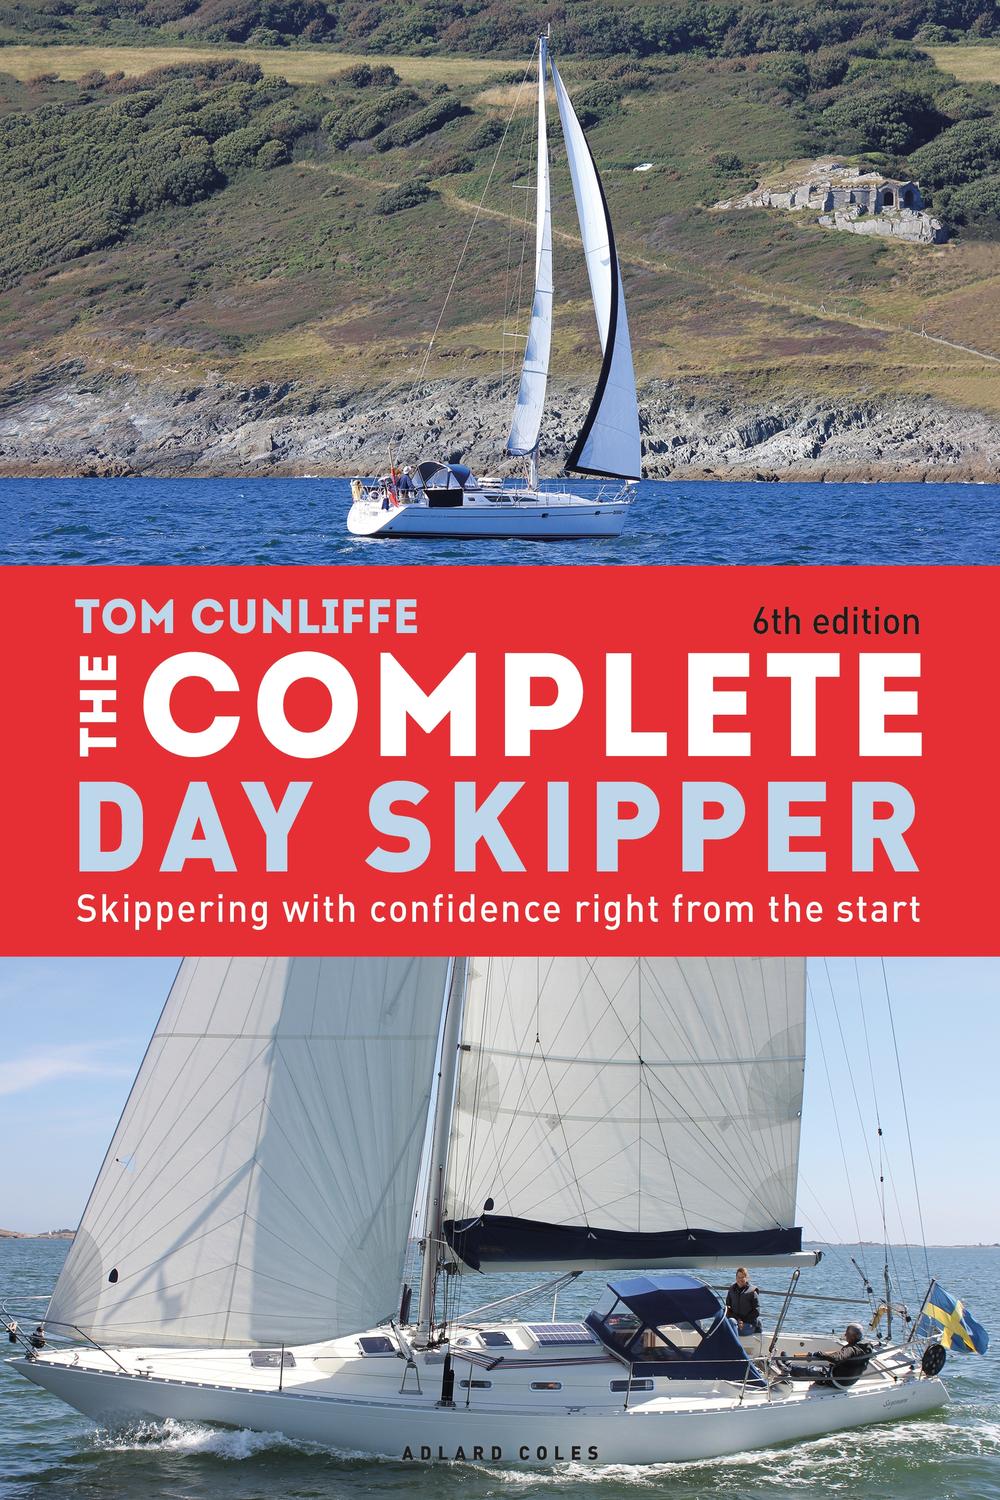 The Complete Day Skipper - Tom Cunliffe,,